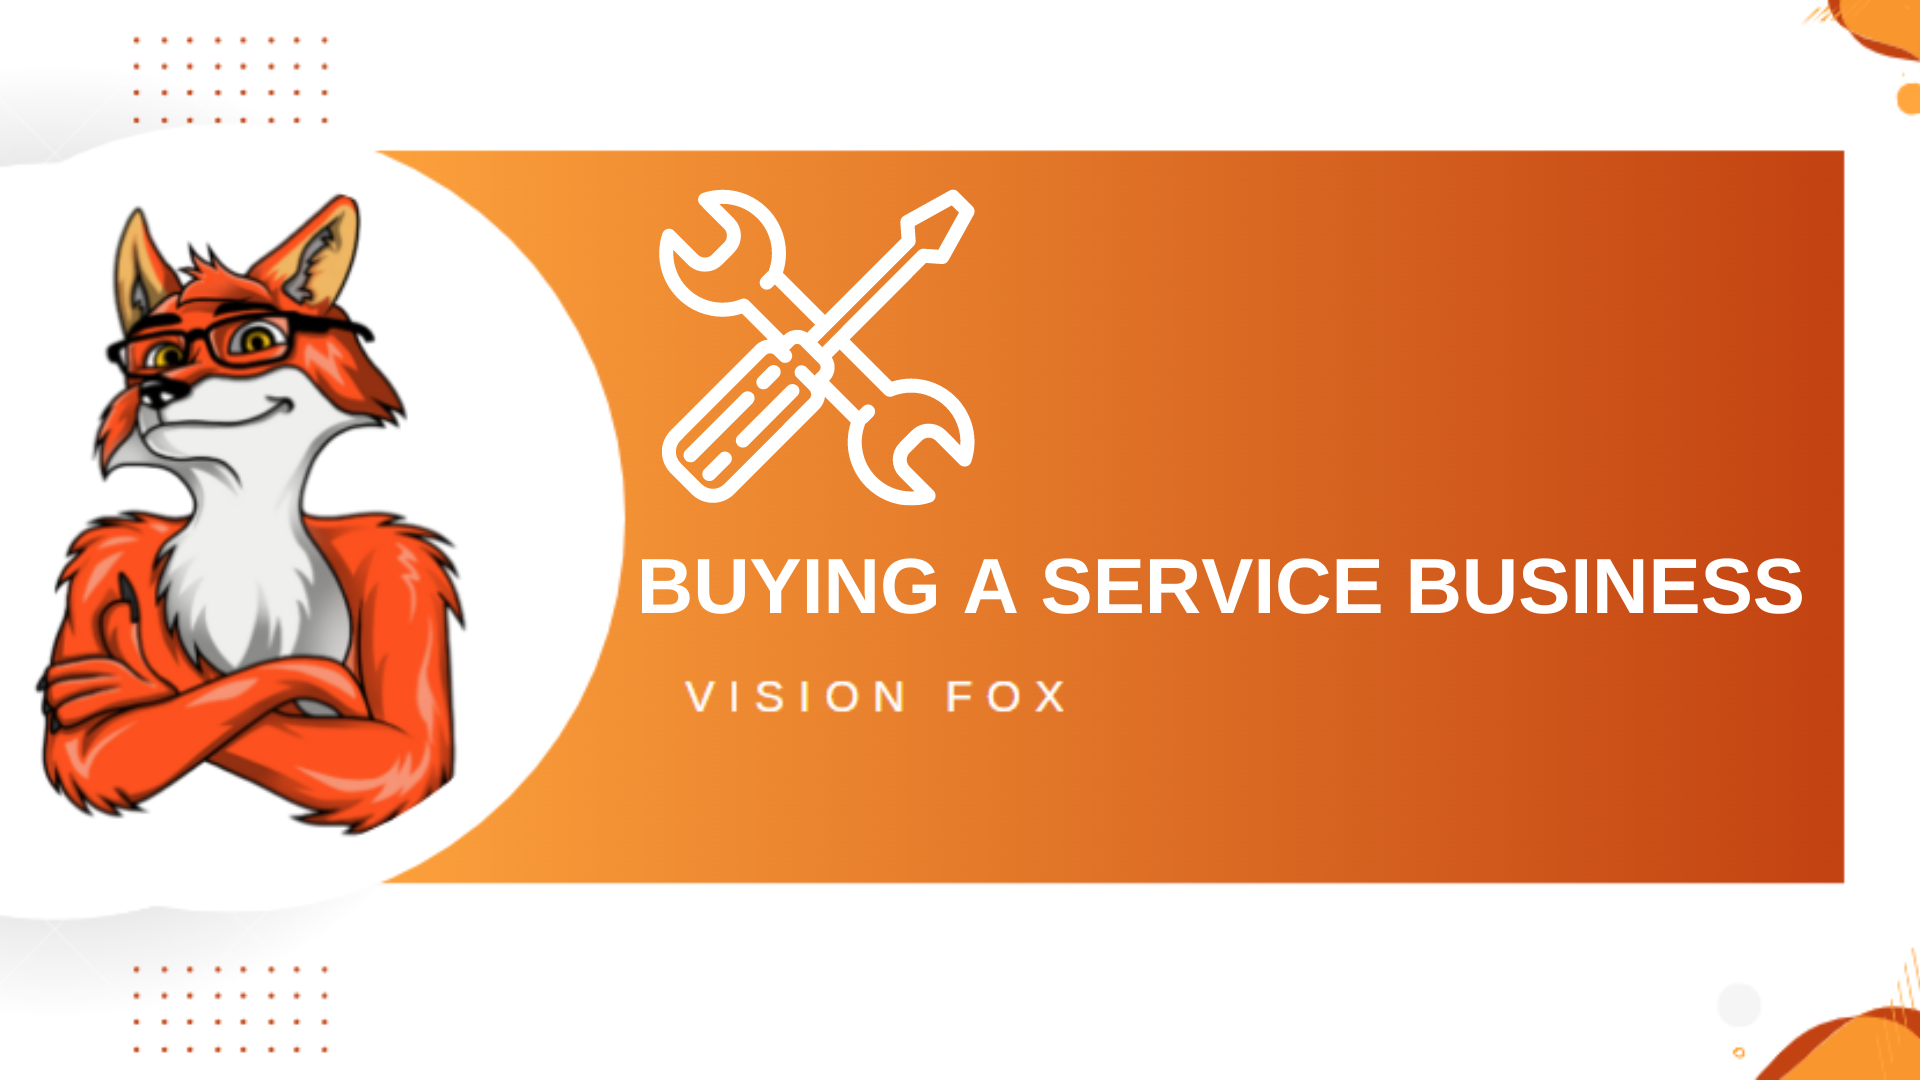 Things to consider when buying a Service Business